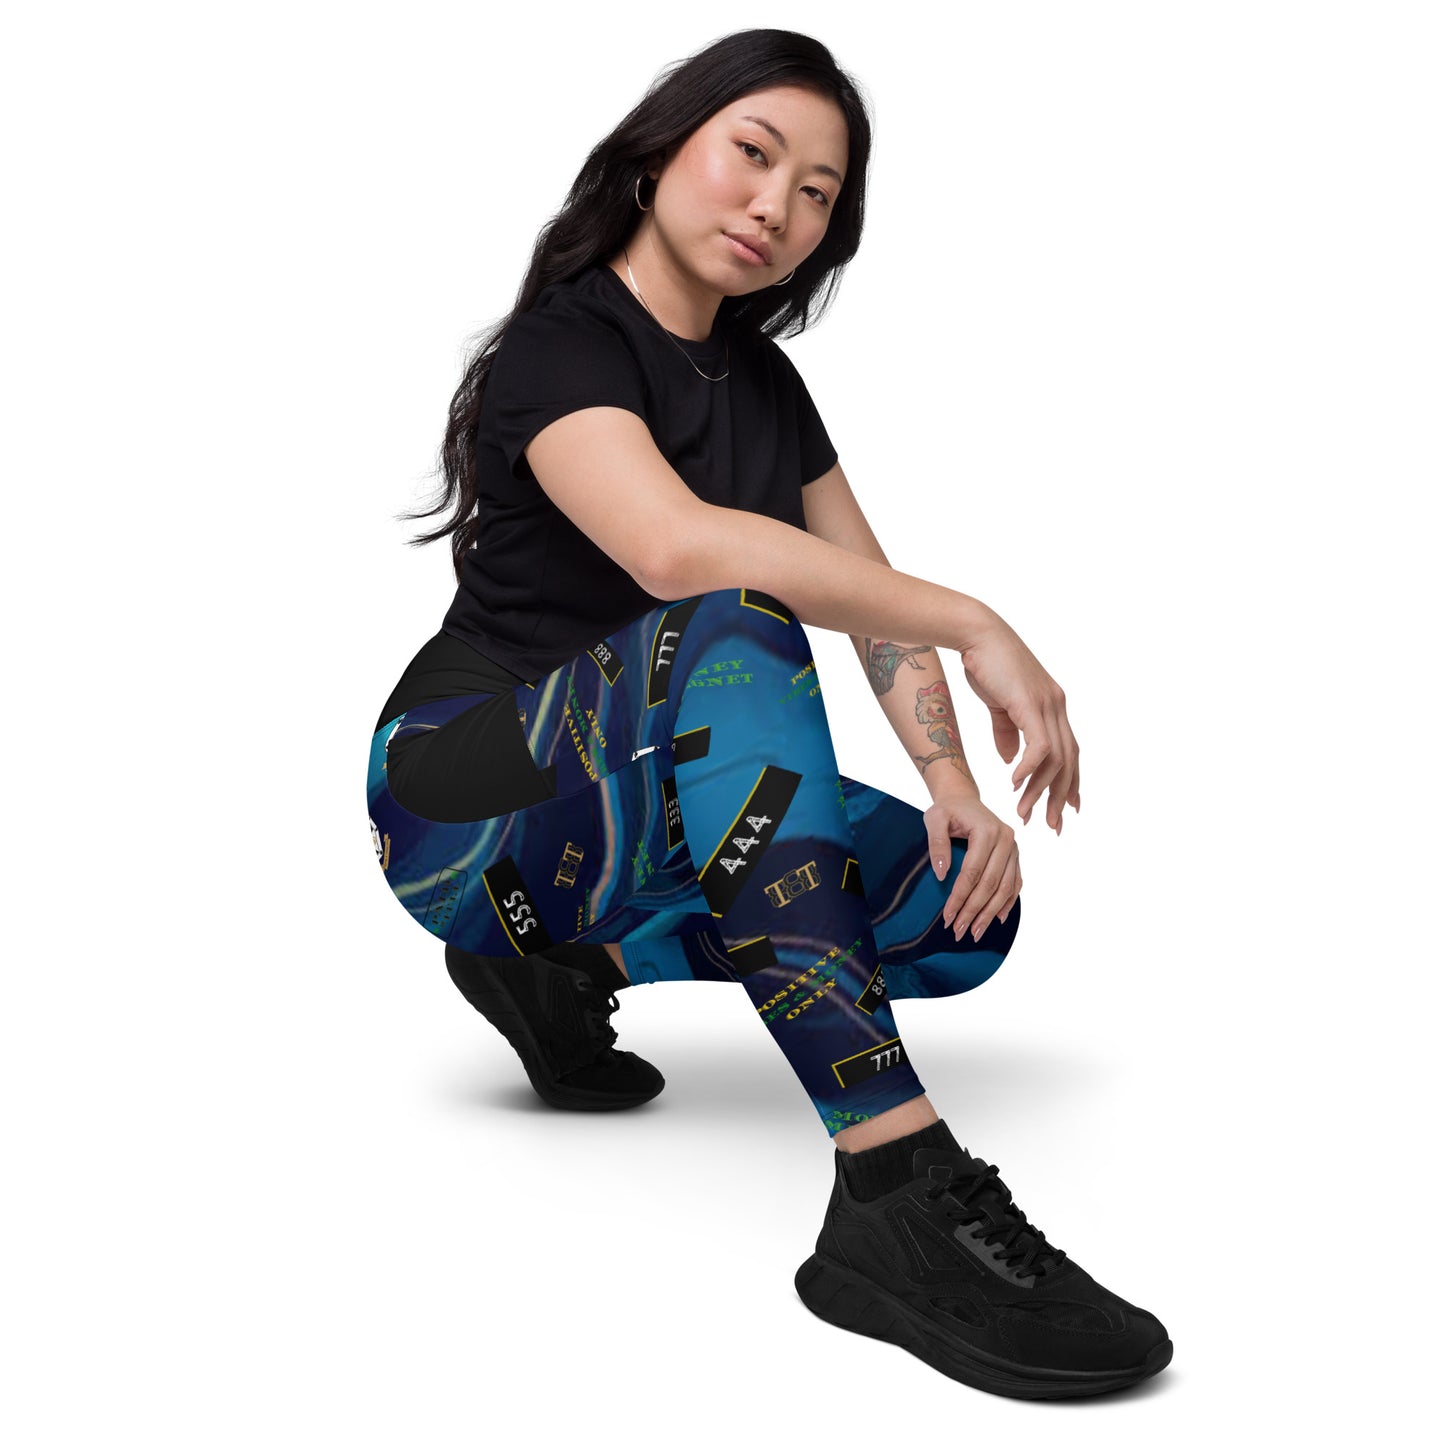 8xquiZit Collection - Women's Manifestation Ocean Viewz Blue Marble Crossover leggings with Pockets